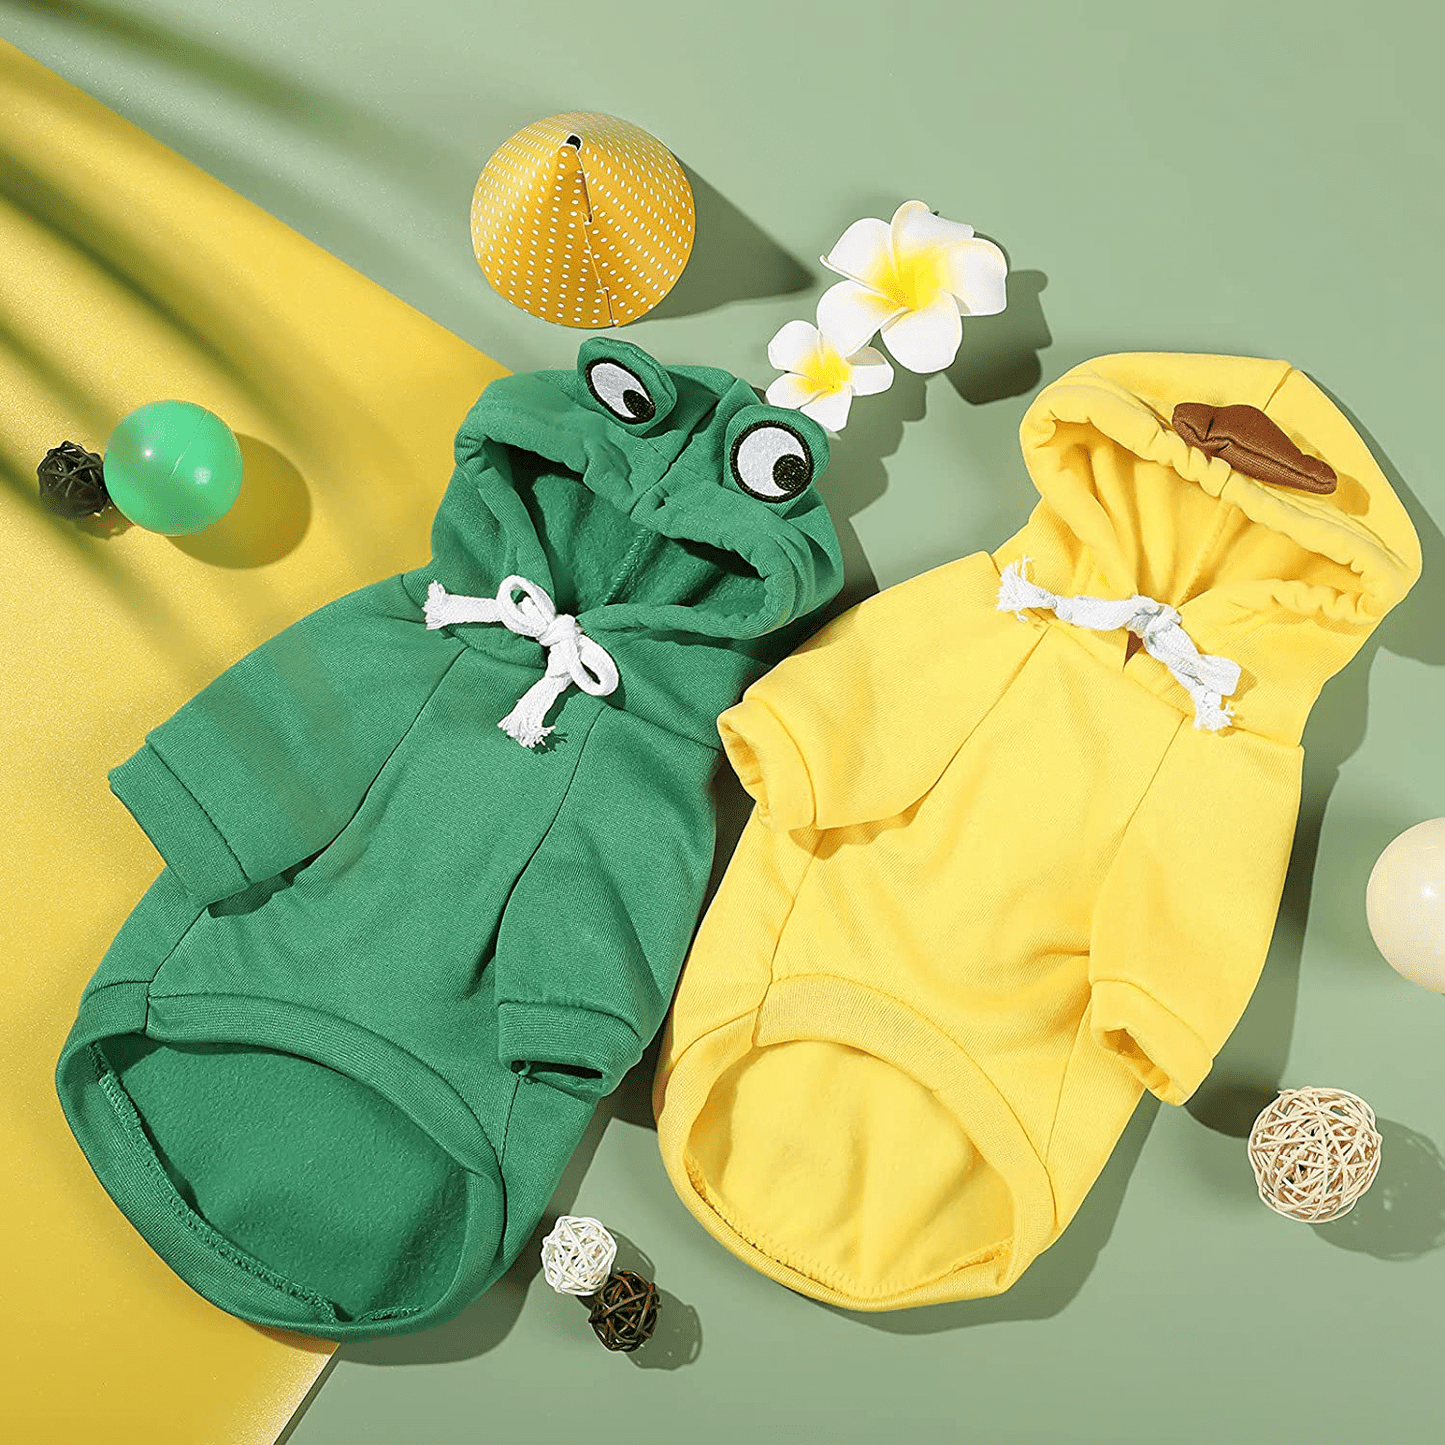 2 Pieces Fruit Dog Hoodie Clothes,Cute Dog Costume Warm Dog Sweater Cold Weather Sweatshirt Pet Coat for Puppy Small Medium Dogs Cats